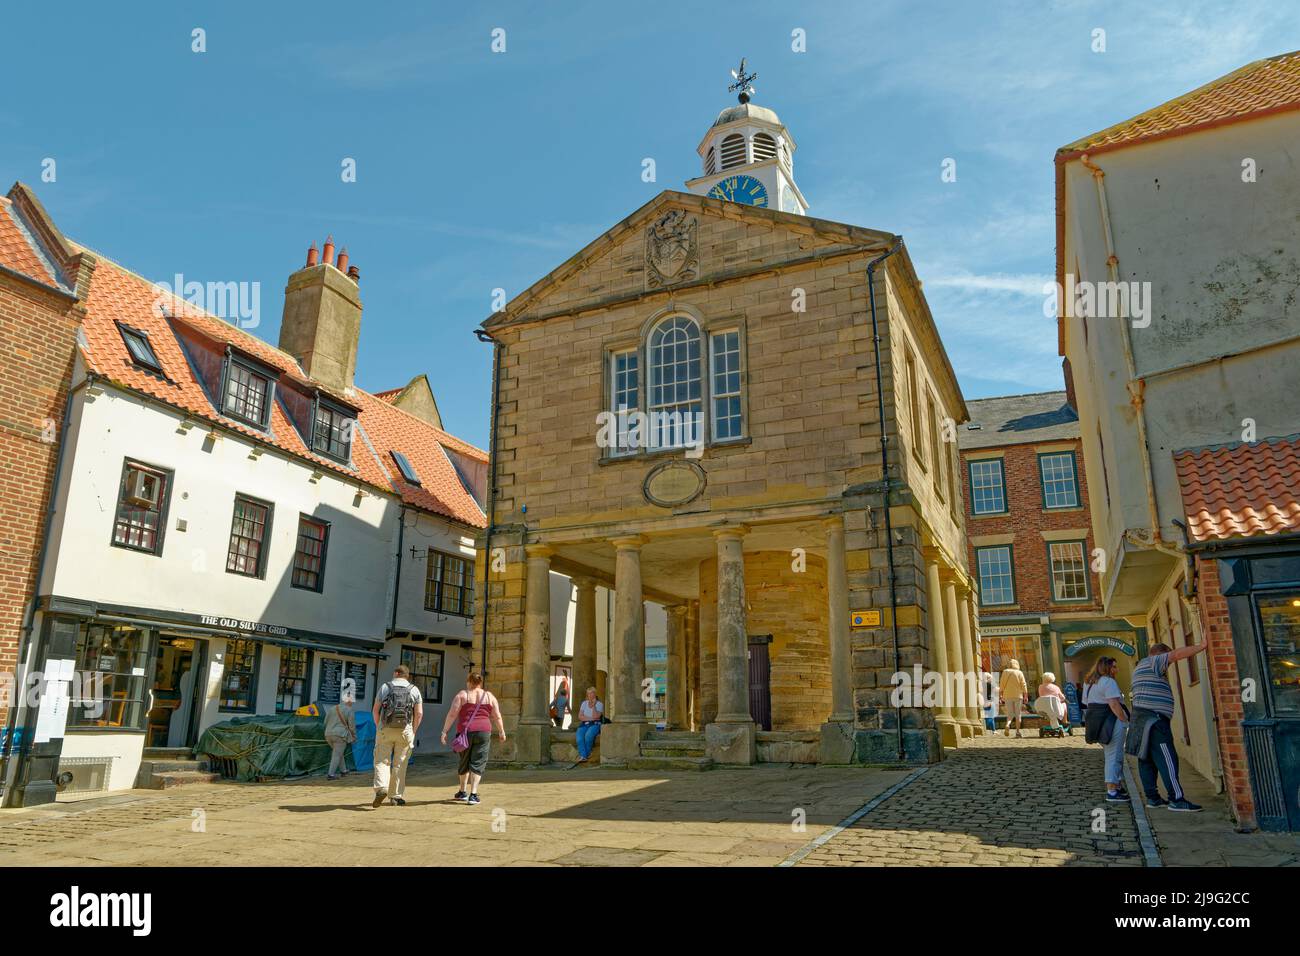 The old Whitby town hall on the East bank of the River Esk in Whitby, North Yorkshire, England. Stock Photo